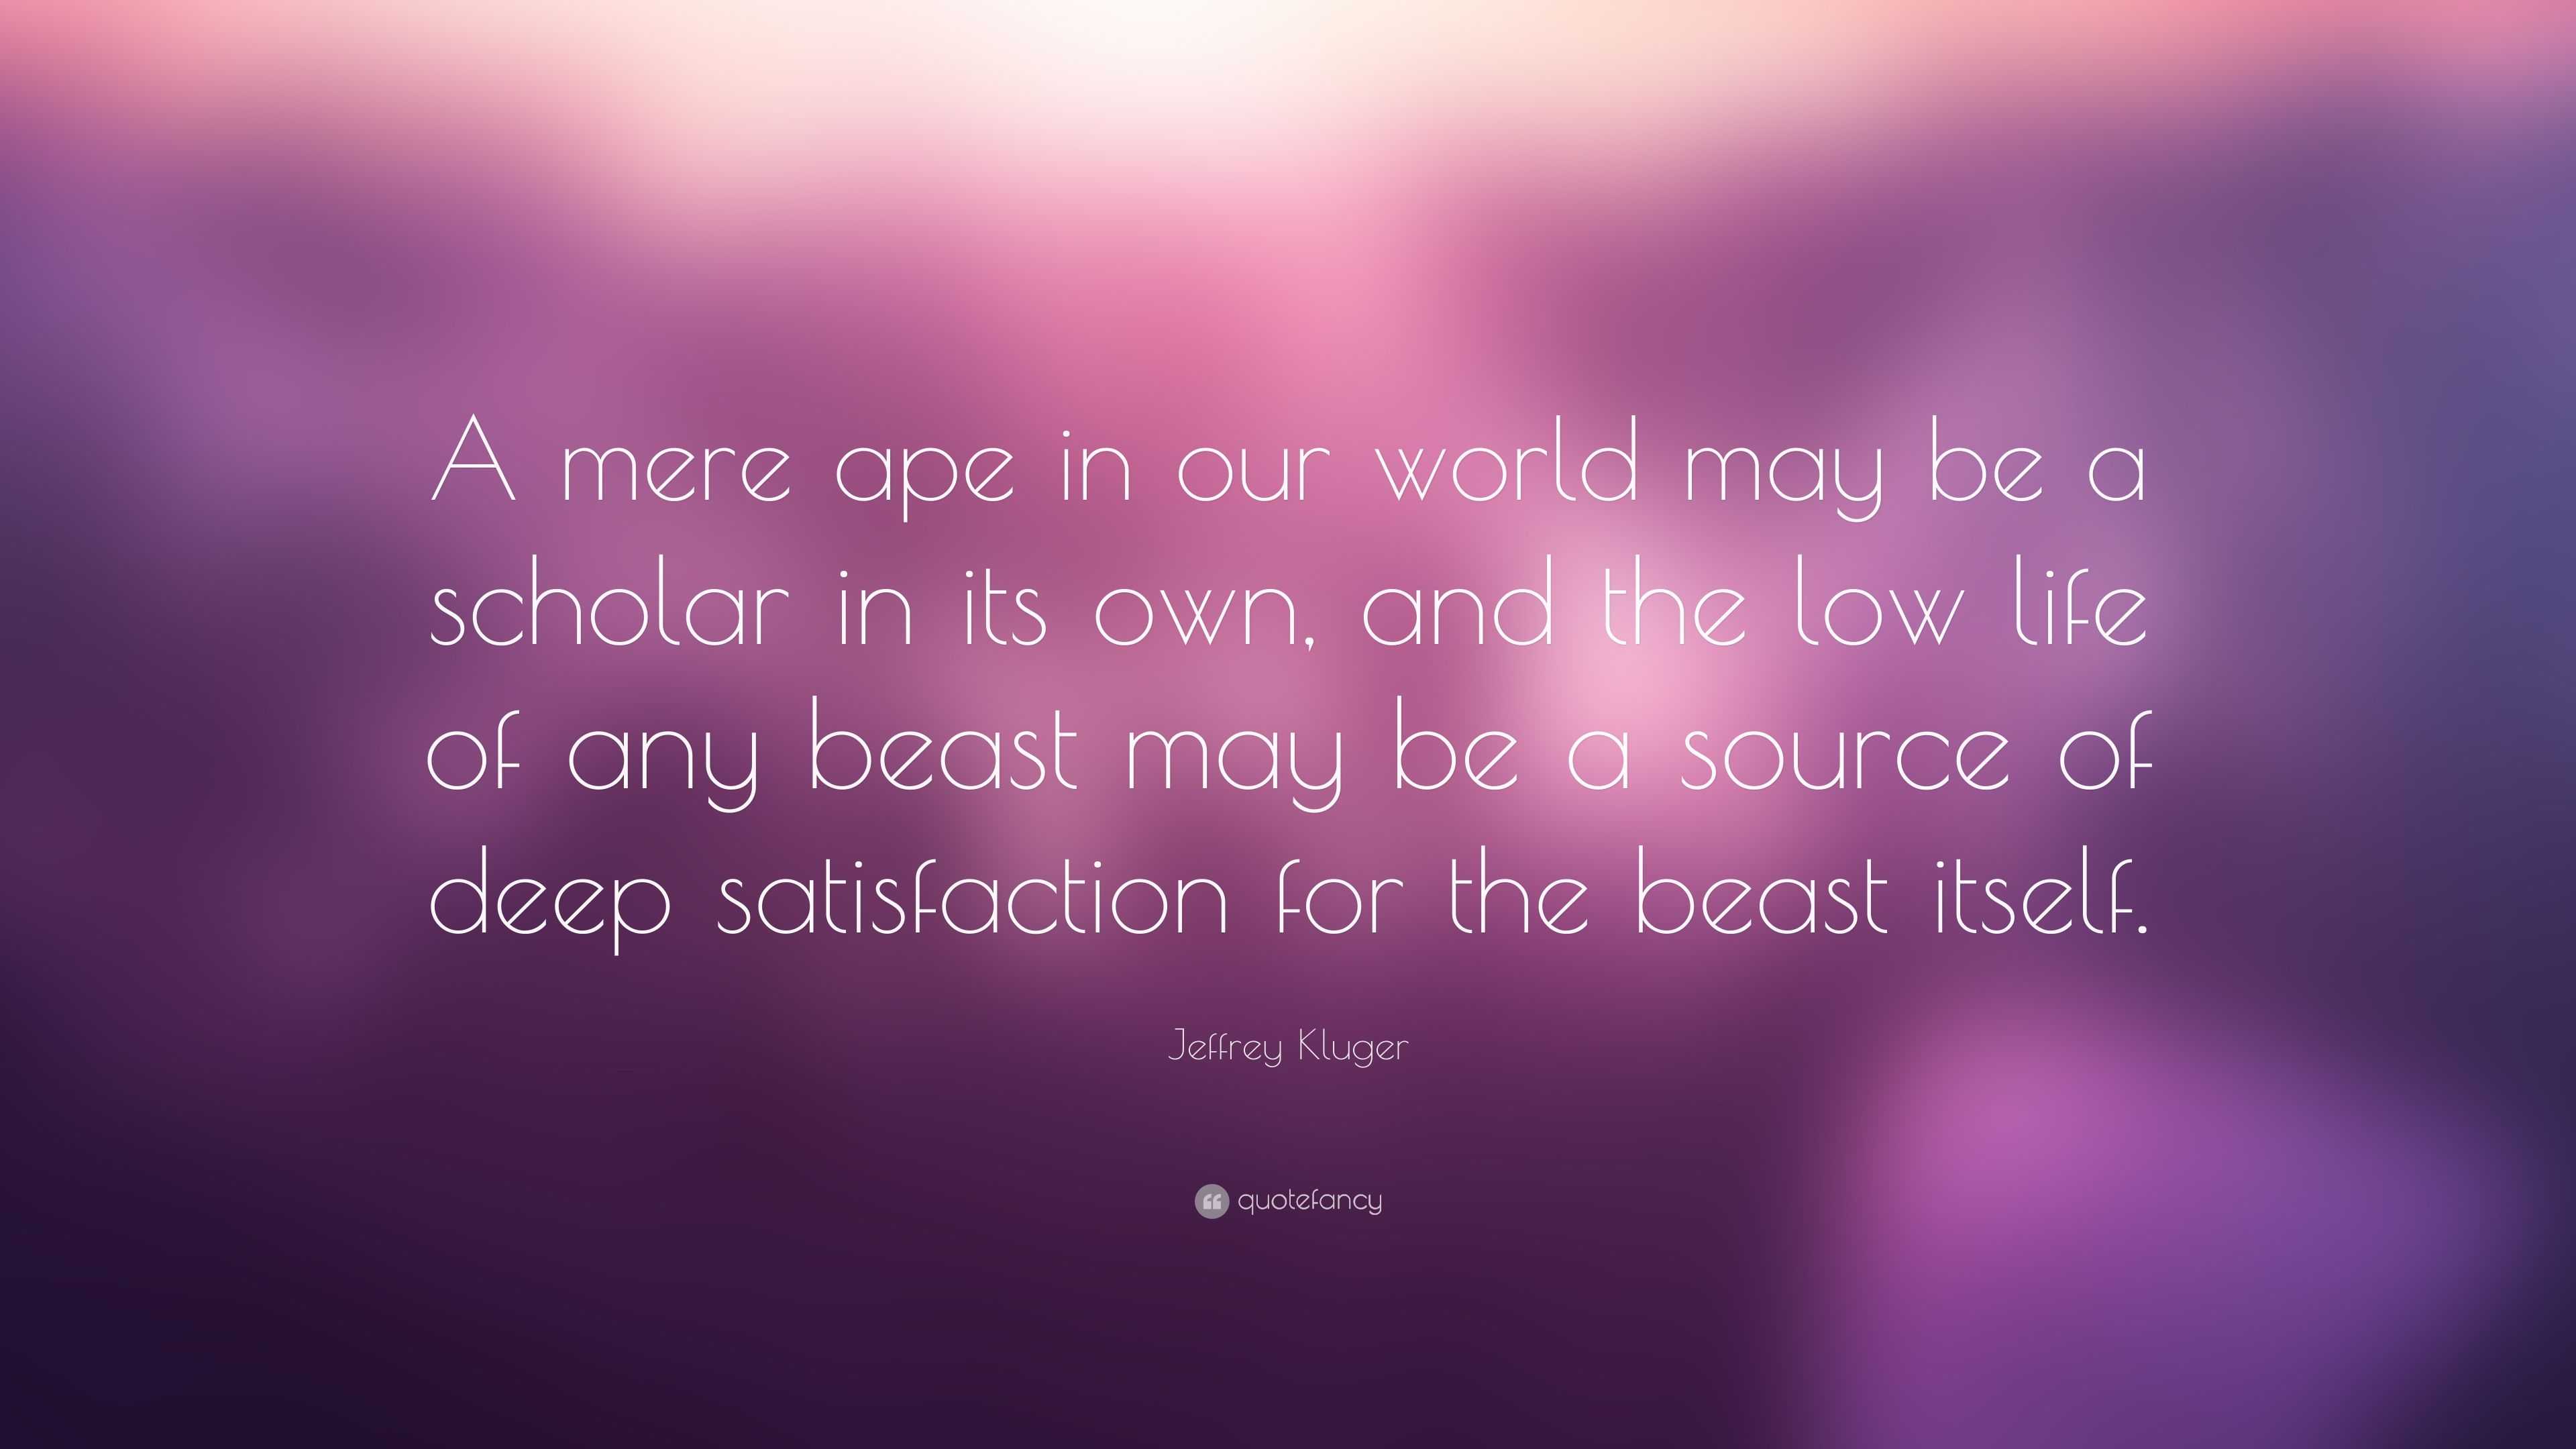 Jeffrey Kluger Quote A Mere Ape In Our World May Be A Scholar In Its Own And The Low Life Of Any Beast May Be A Source Of Deep Satisfaction